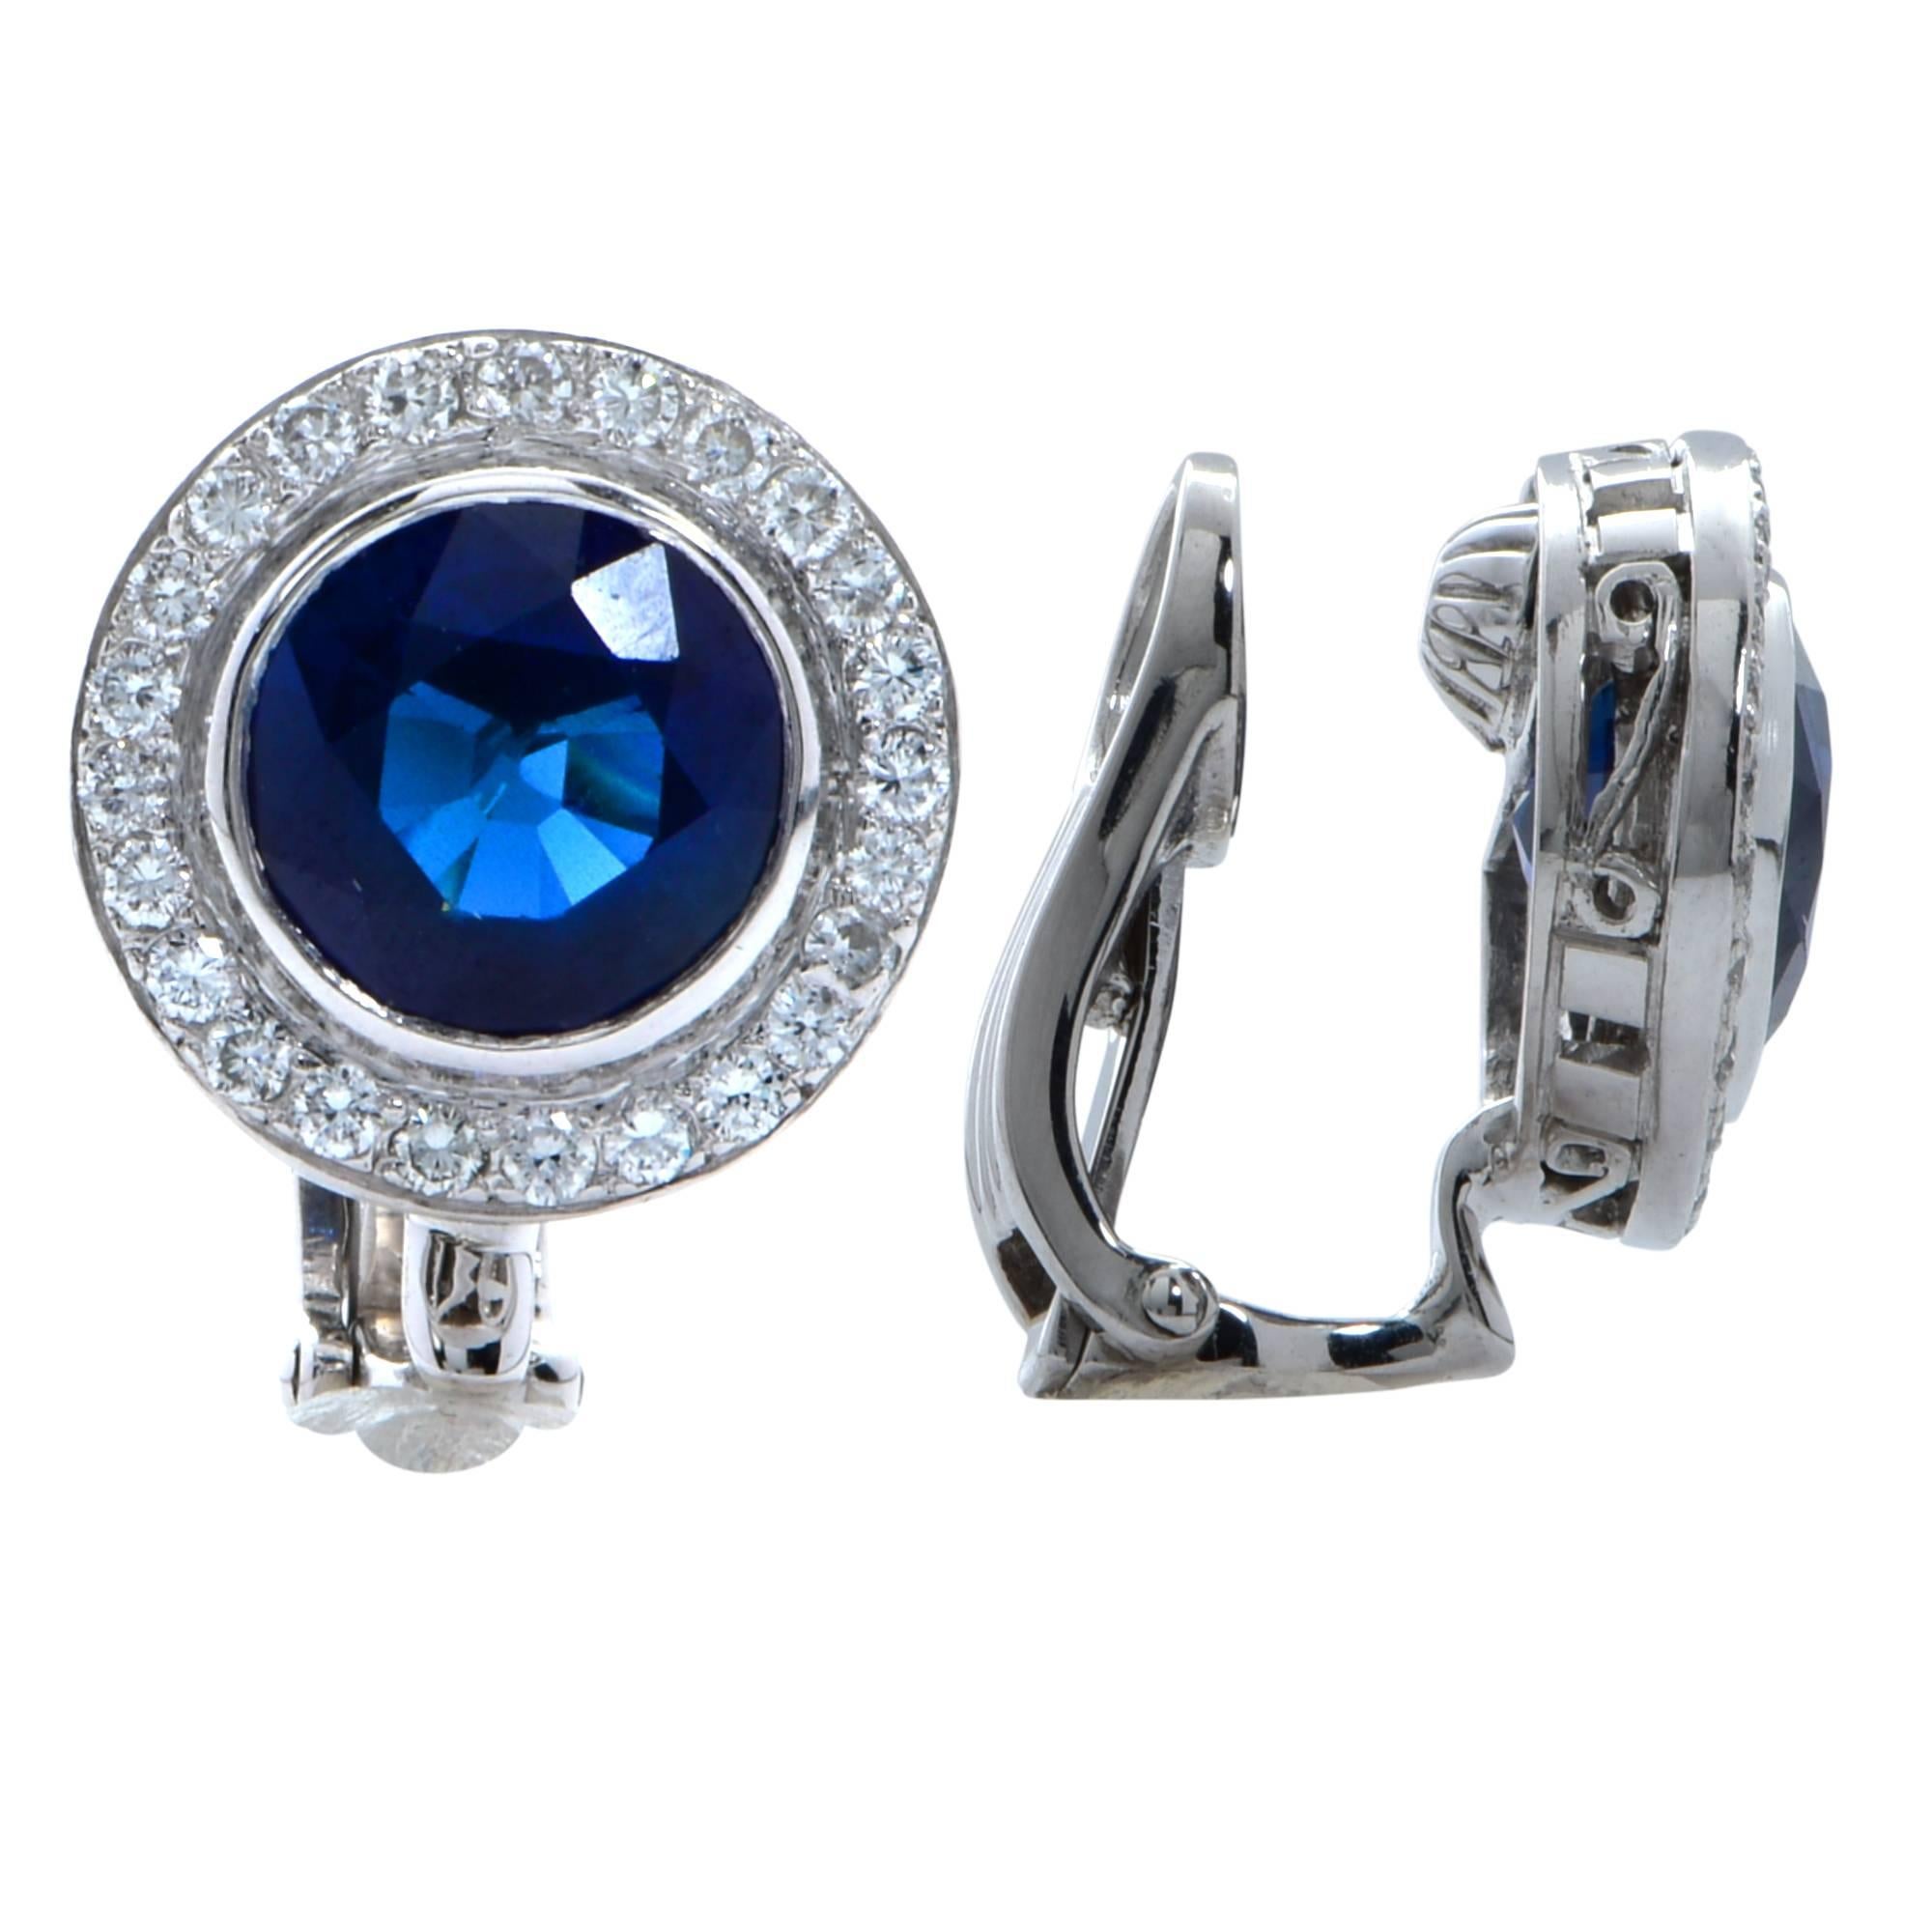 18k white gold halo earrings featuring 2 round cut sapphires weighing approximately 4.5cts total accented by 44 round brilliant cut diamonds weighing approximately .50cts total G color VS clarity.   


Our pieces are all accompanied by an appraisal